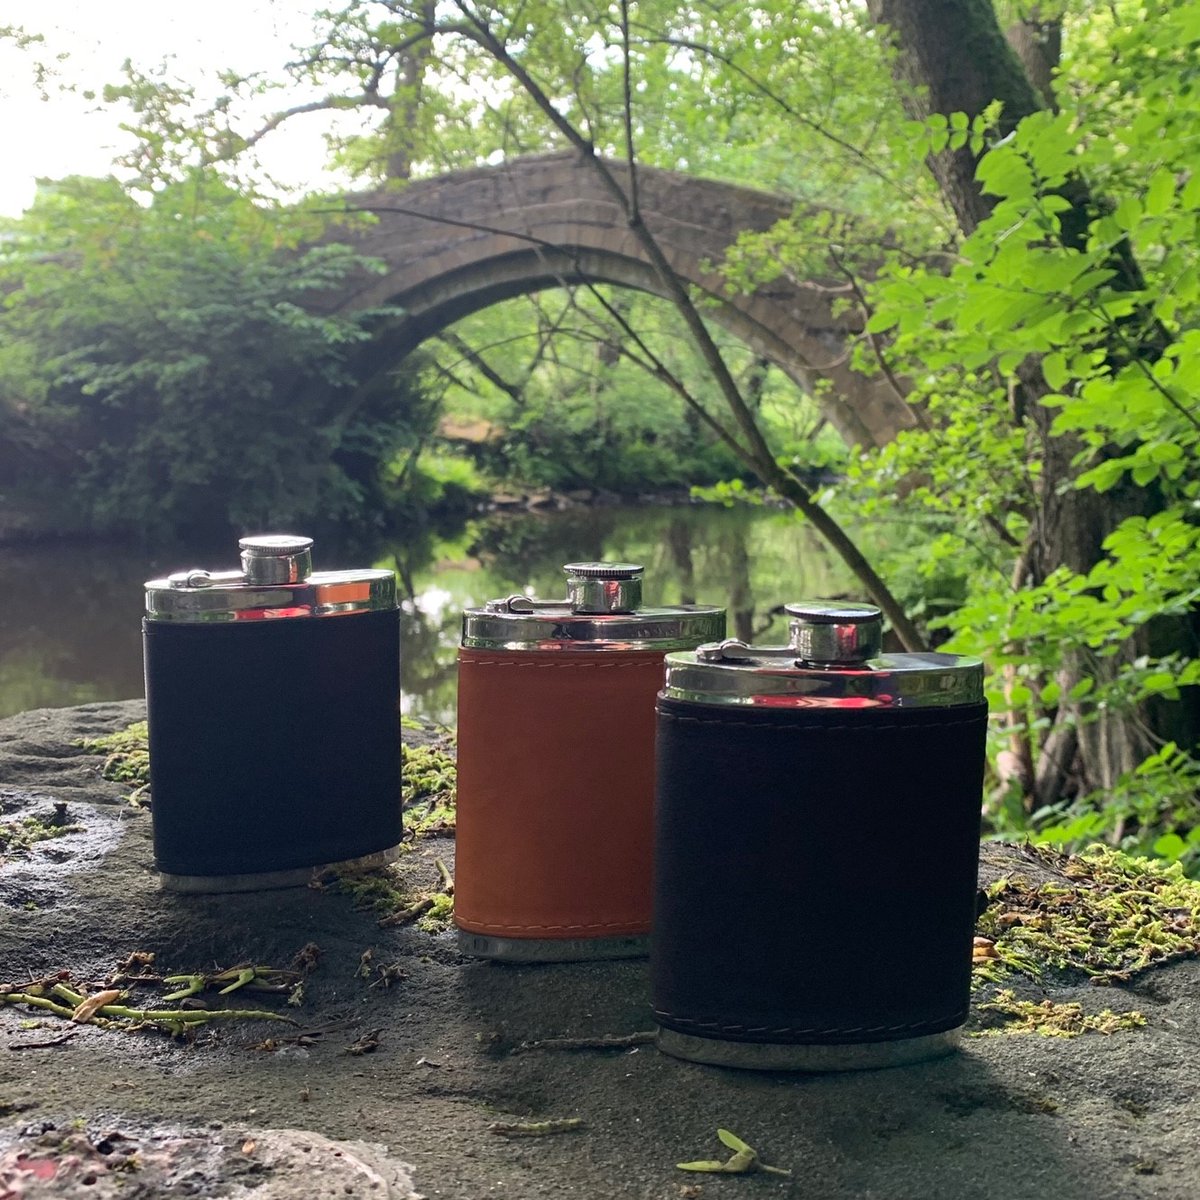 Our leather flasks are covered with genuine hand stitched leather and available in three colours. They will last for generations and serve as a heirloom with class, distinction, quality and taste #fathersday #hipflask #madeinsheffield #standwithsmall #handcrafted #bestmangift